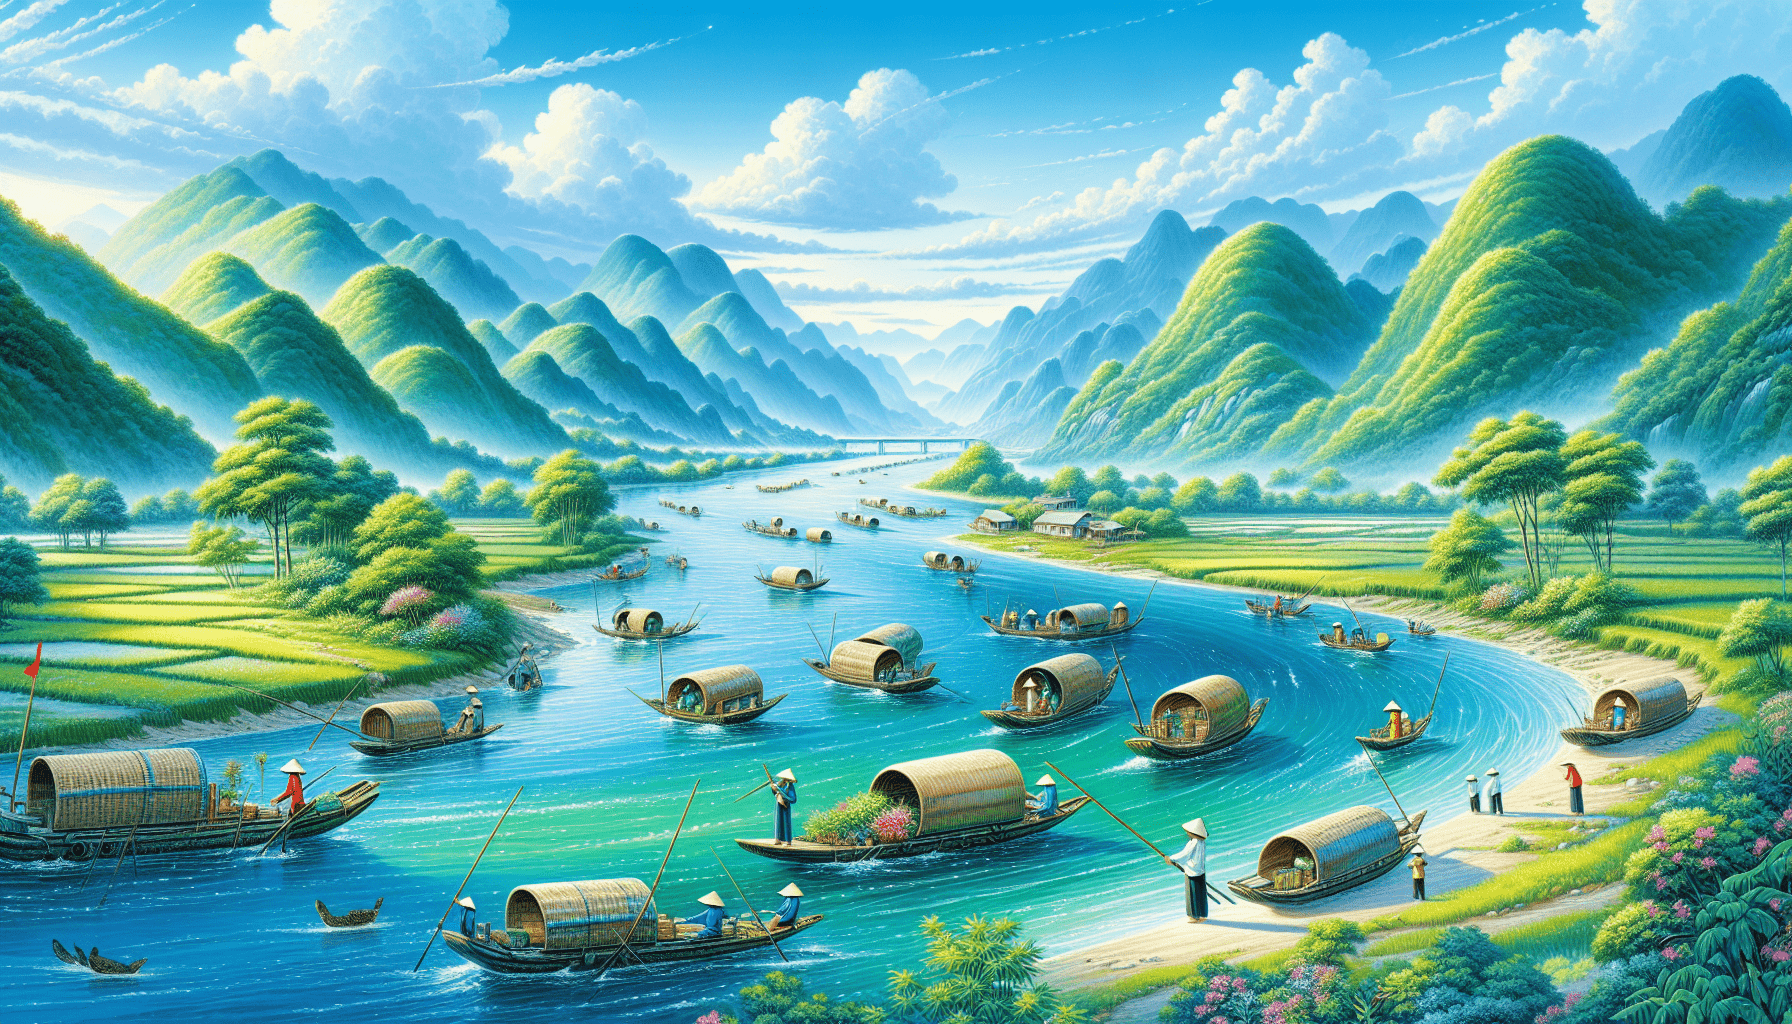 What Is The Longest River In Vietnam?